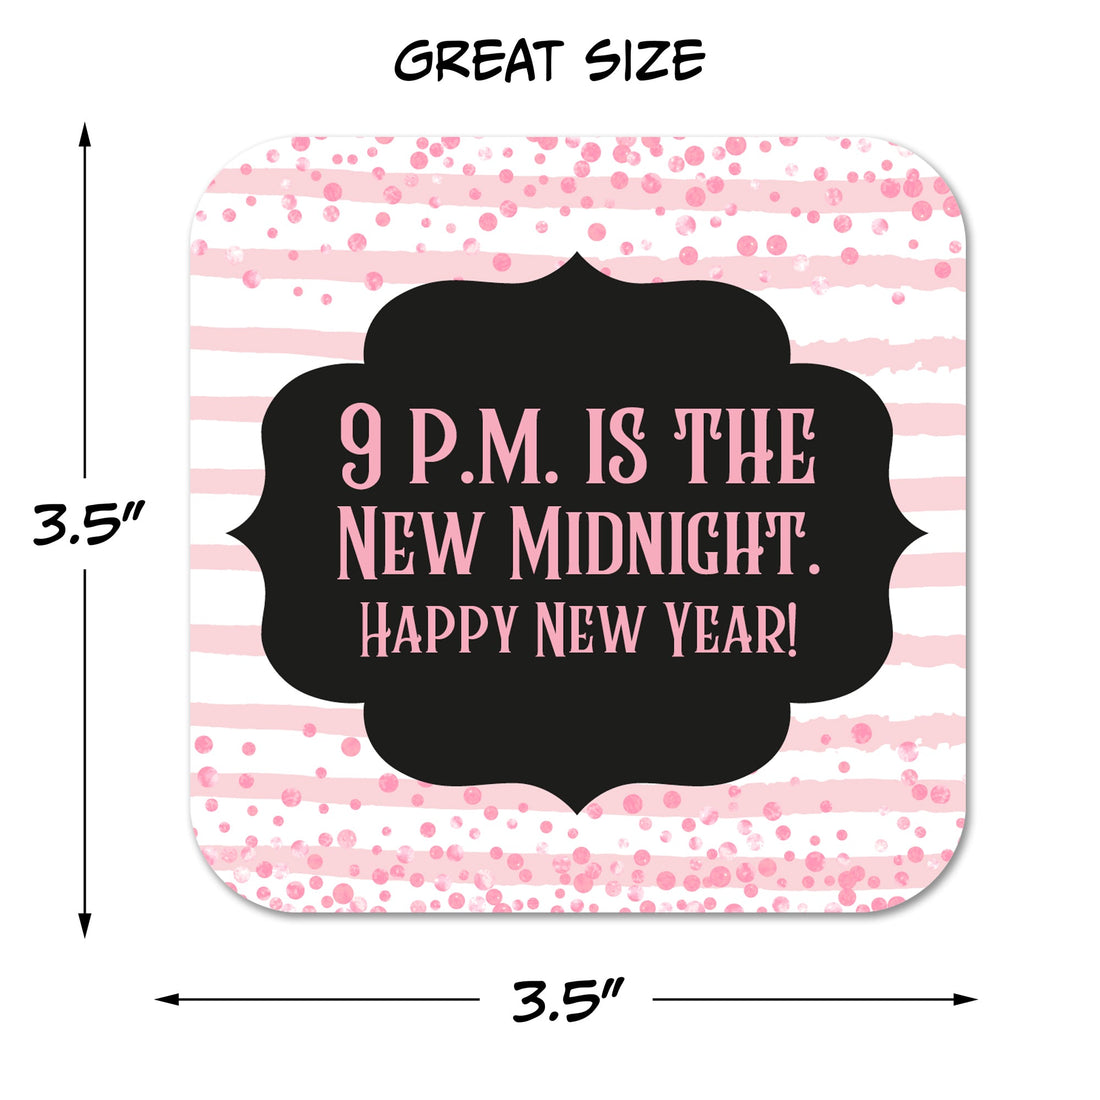 9 P.M. is the New Midnight! New Year's Coaster Set